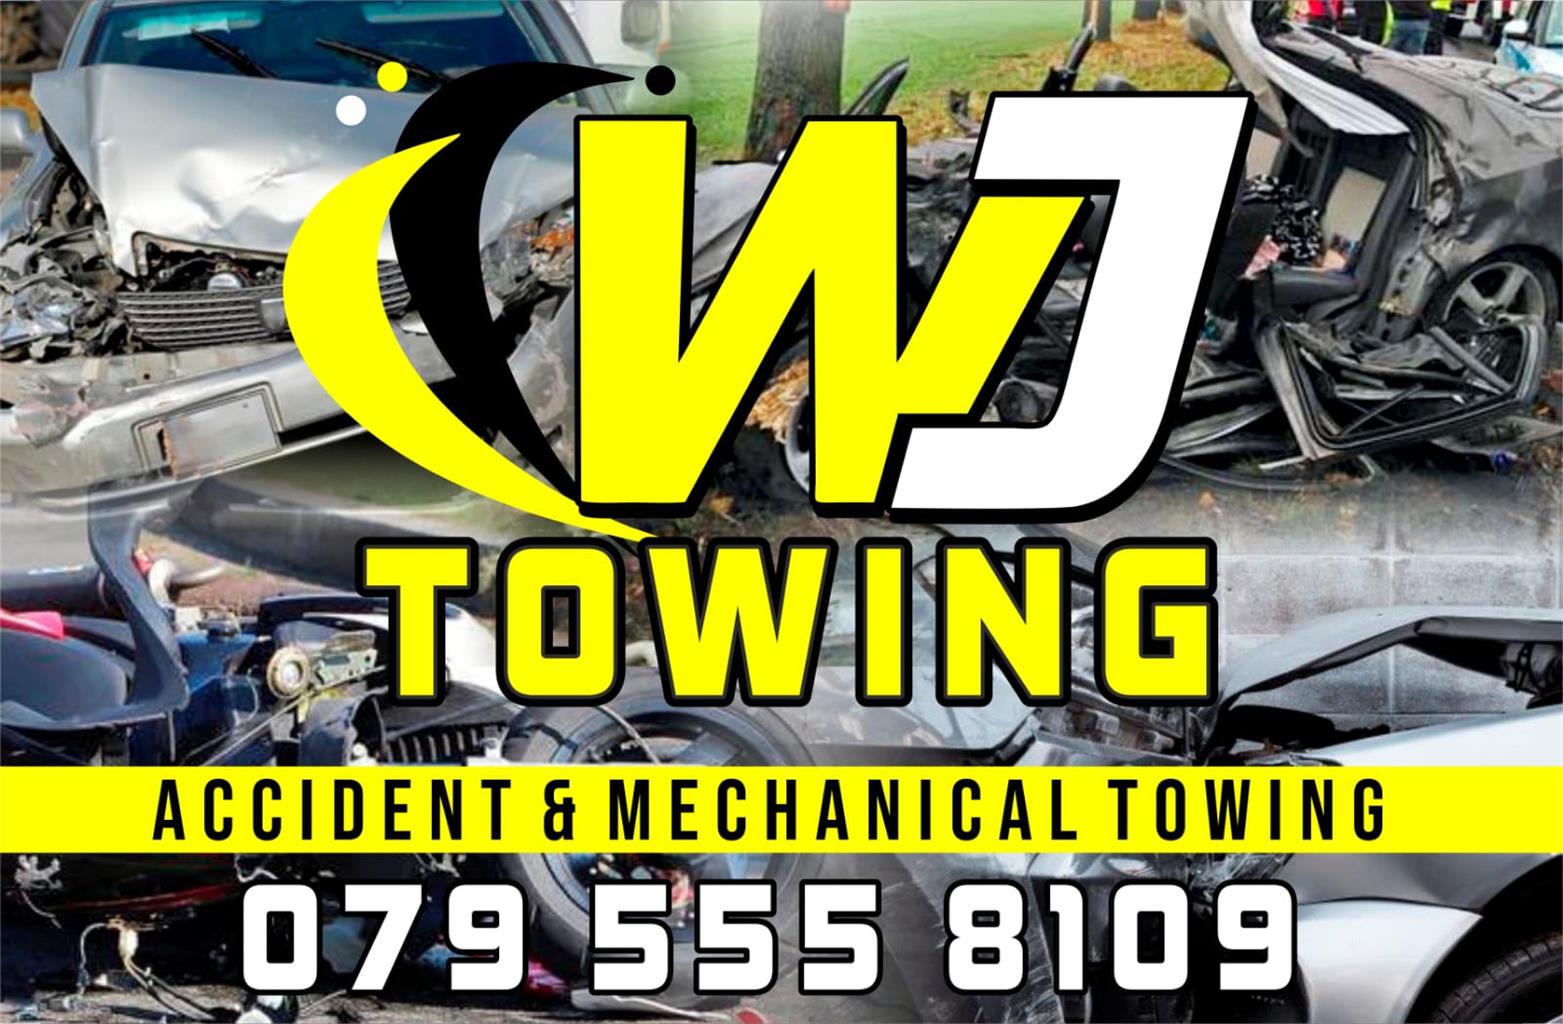 24/7 Accident and Mechanical Towing